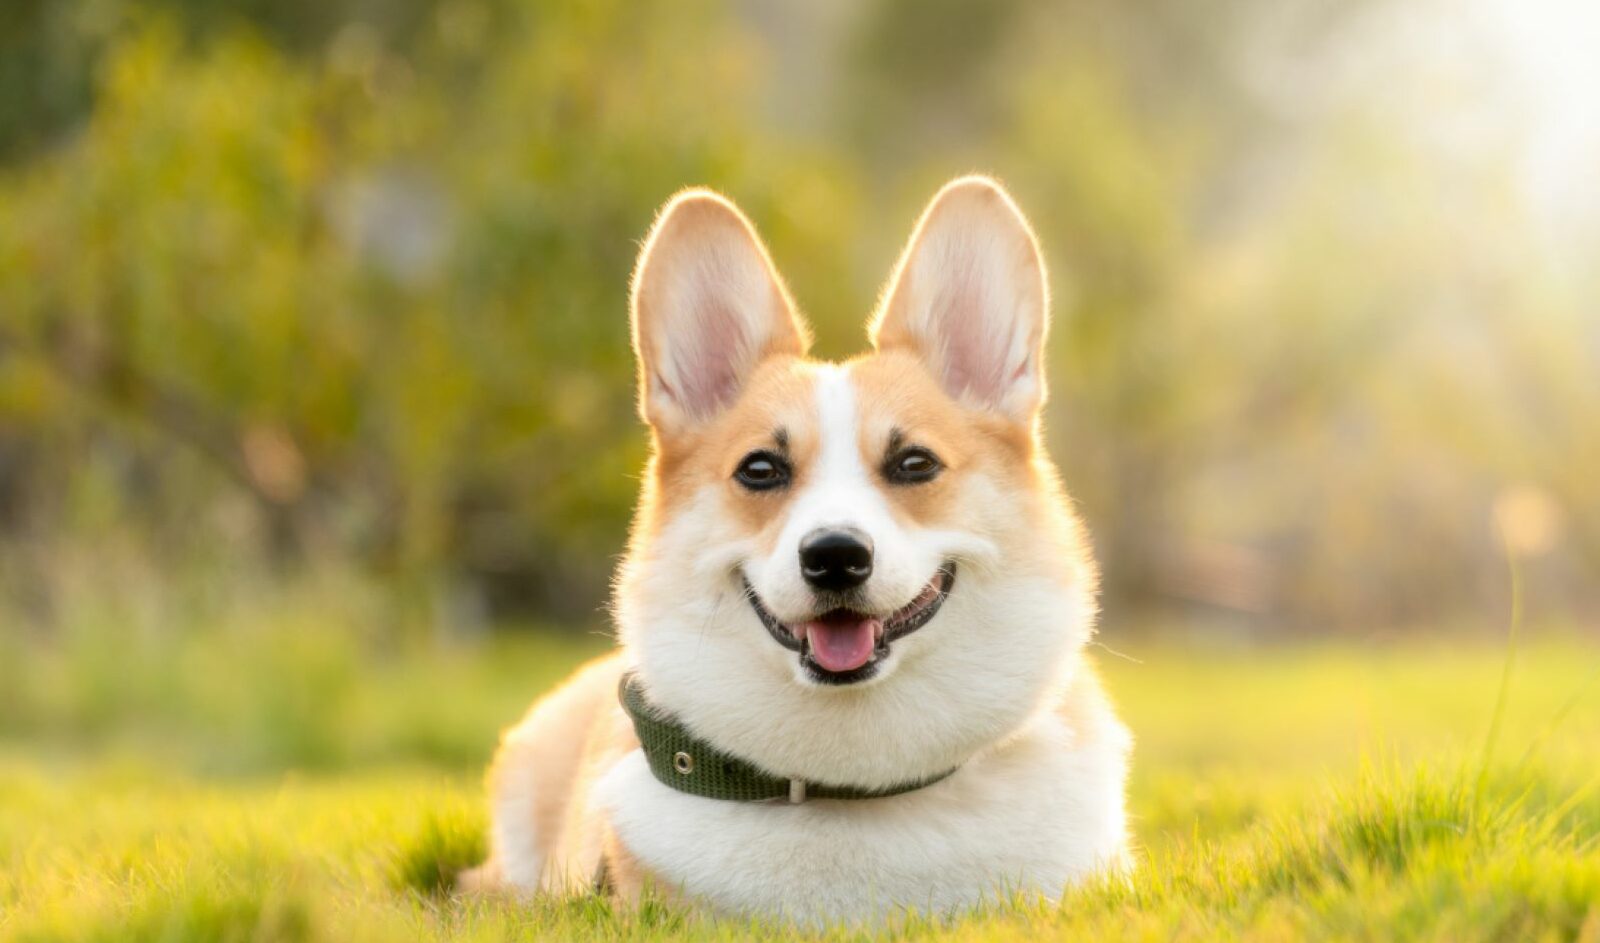 Smiling Dog in a Field